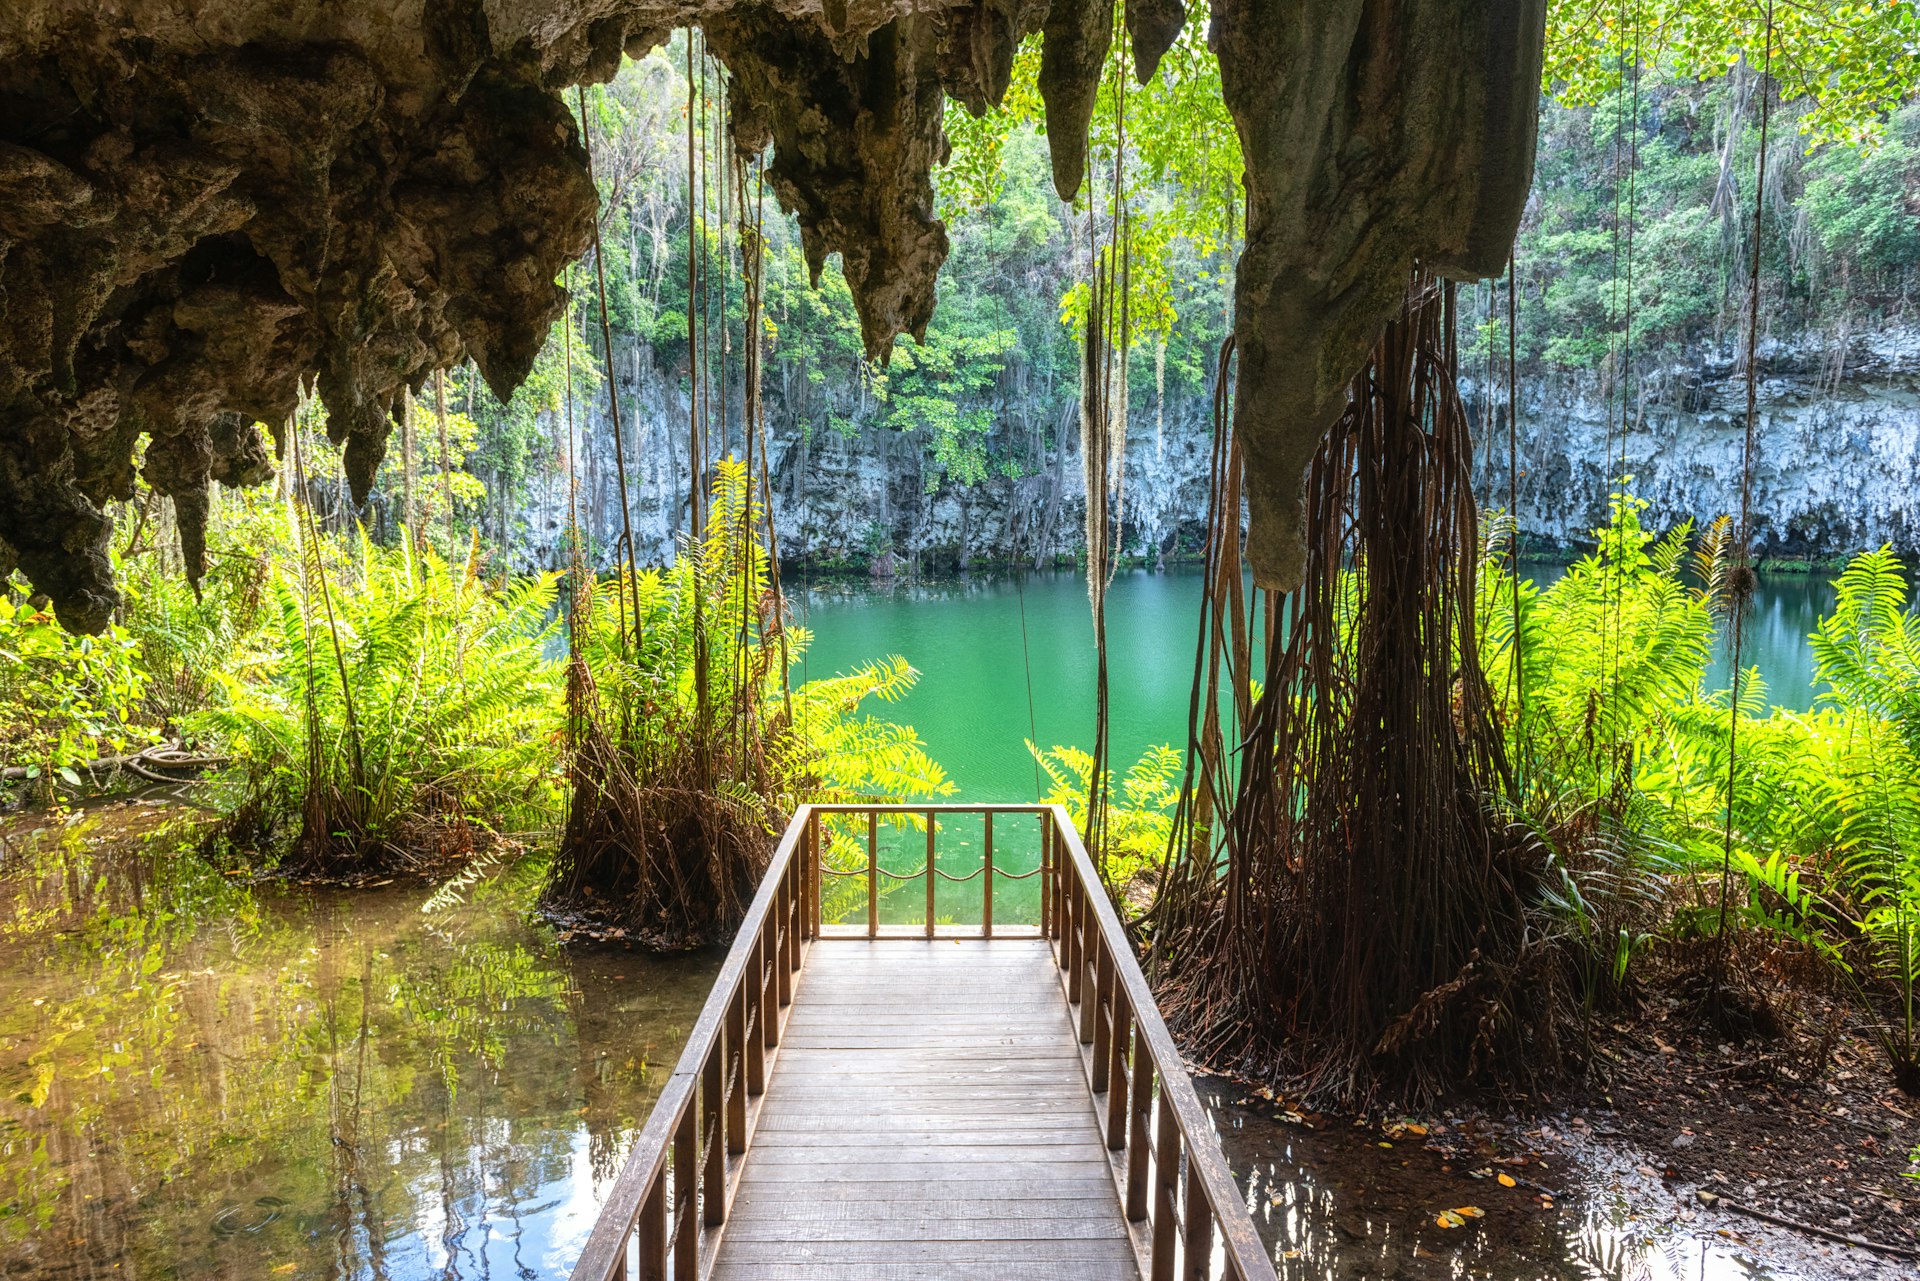 A boardwalk in jungle leads to a turquoise water feature among limestone caves